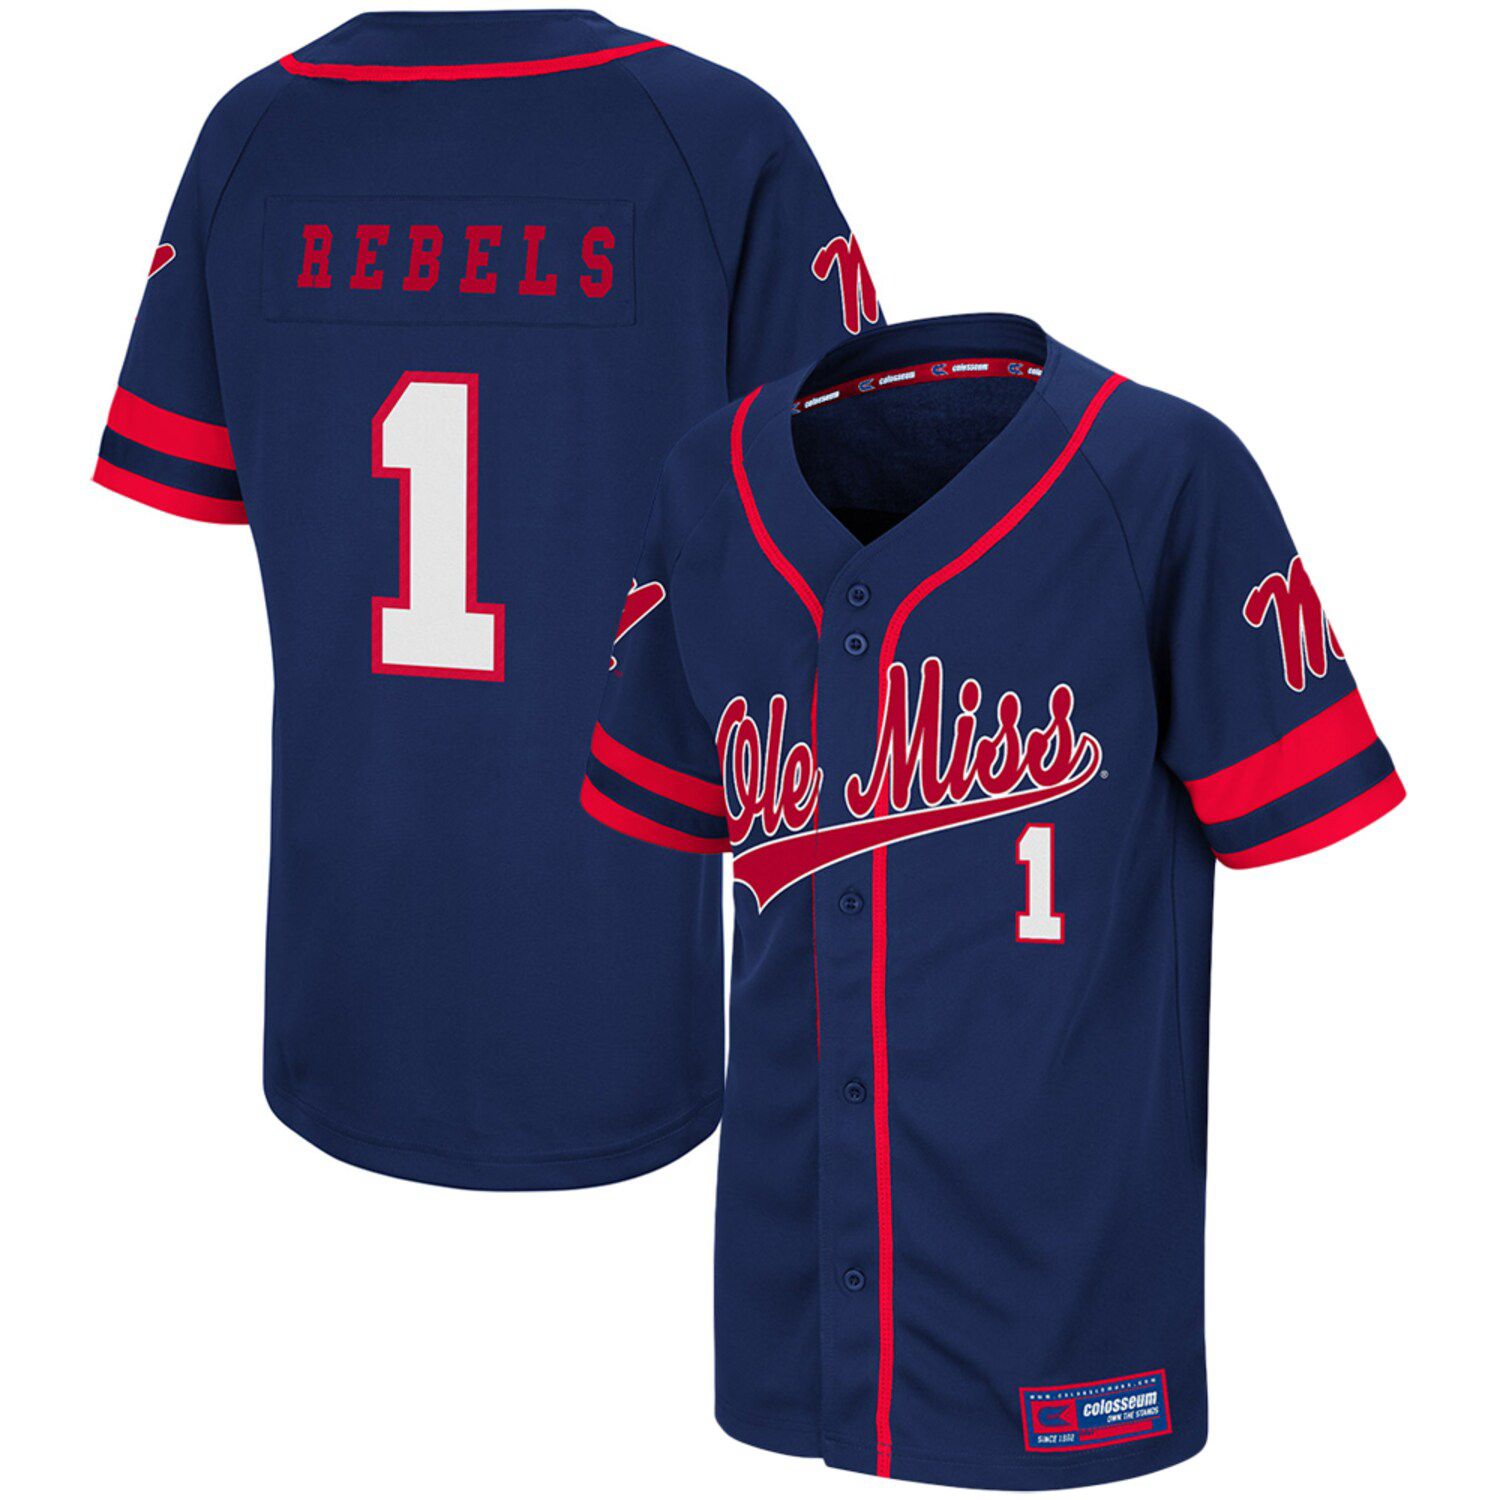 ole miss baseball jersey for sale